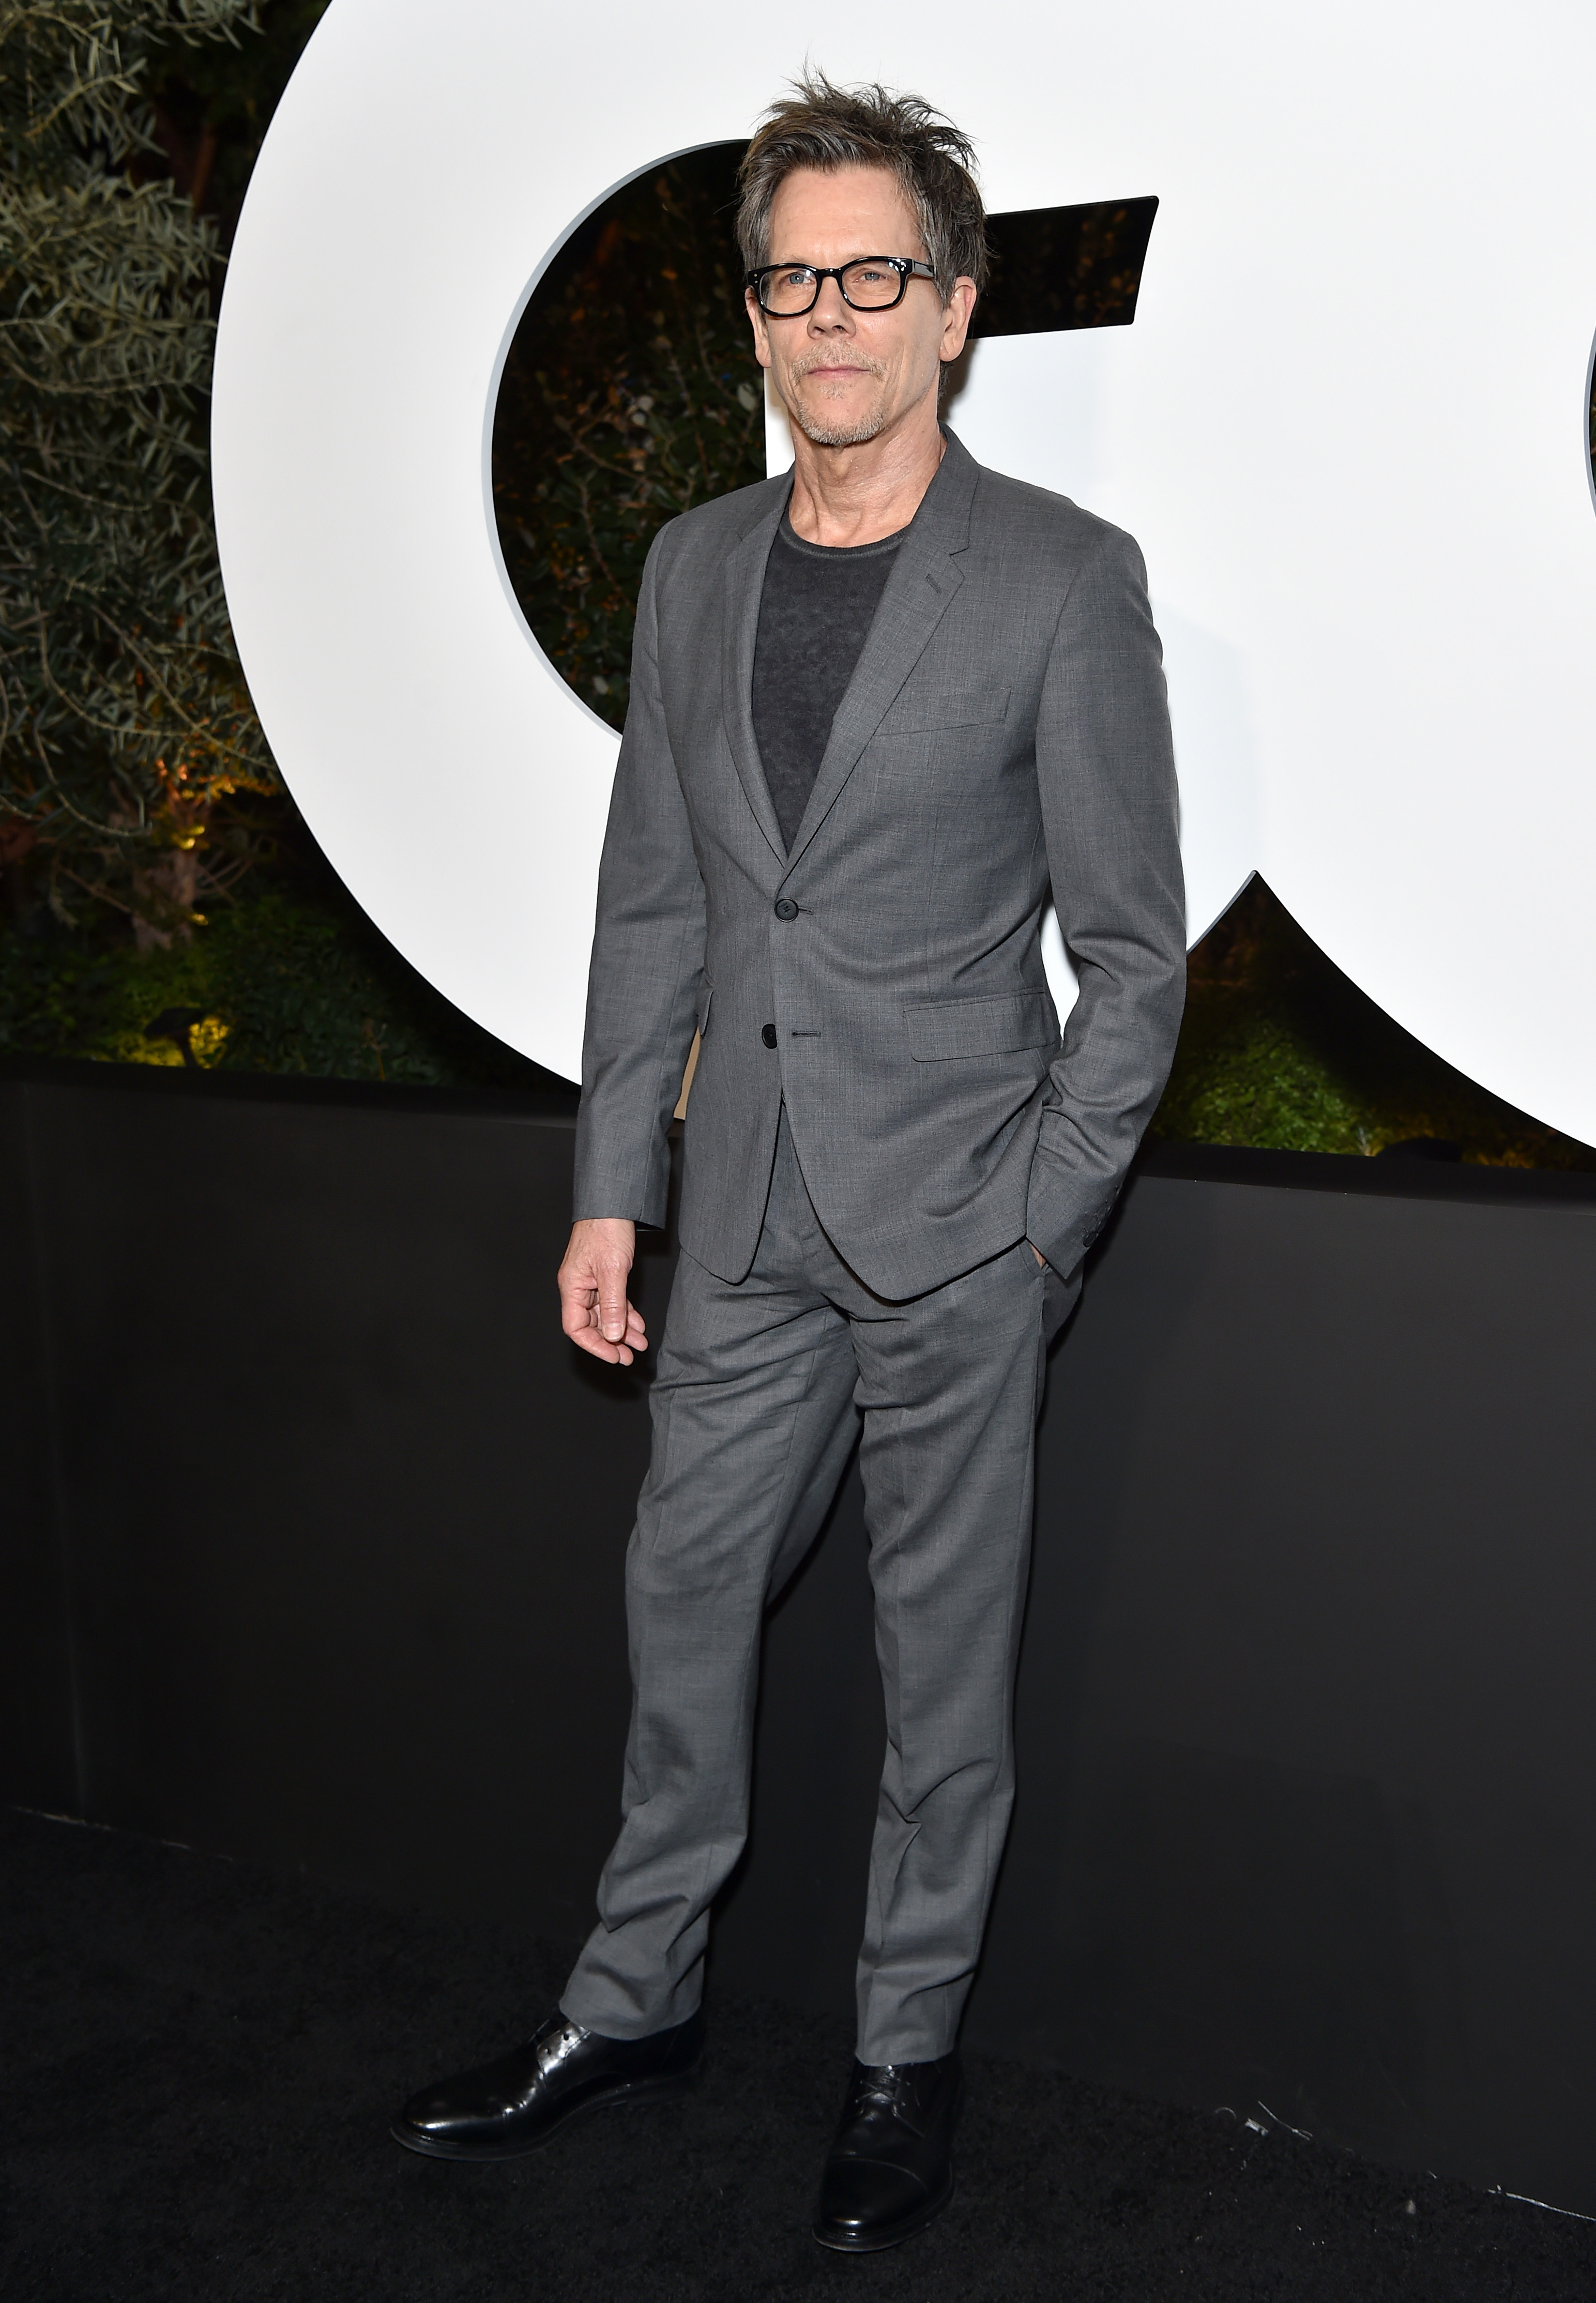 Kevin Bacon at the GQ Men of the Year event in West Hollywood, California on December 5, 2019 | Source: Getty Images